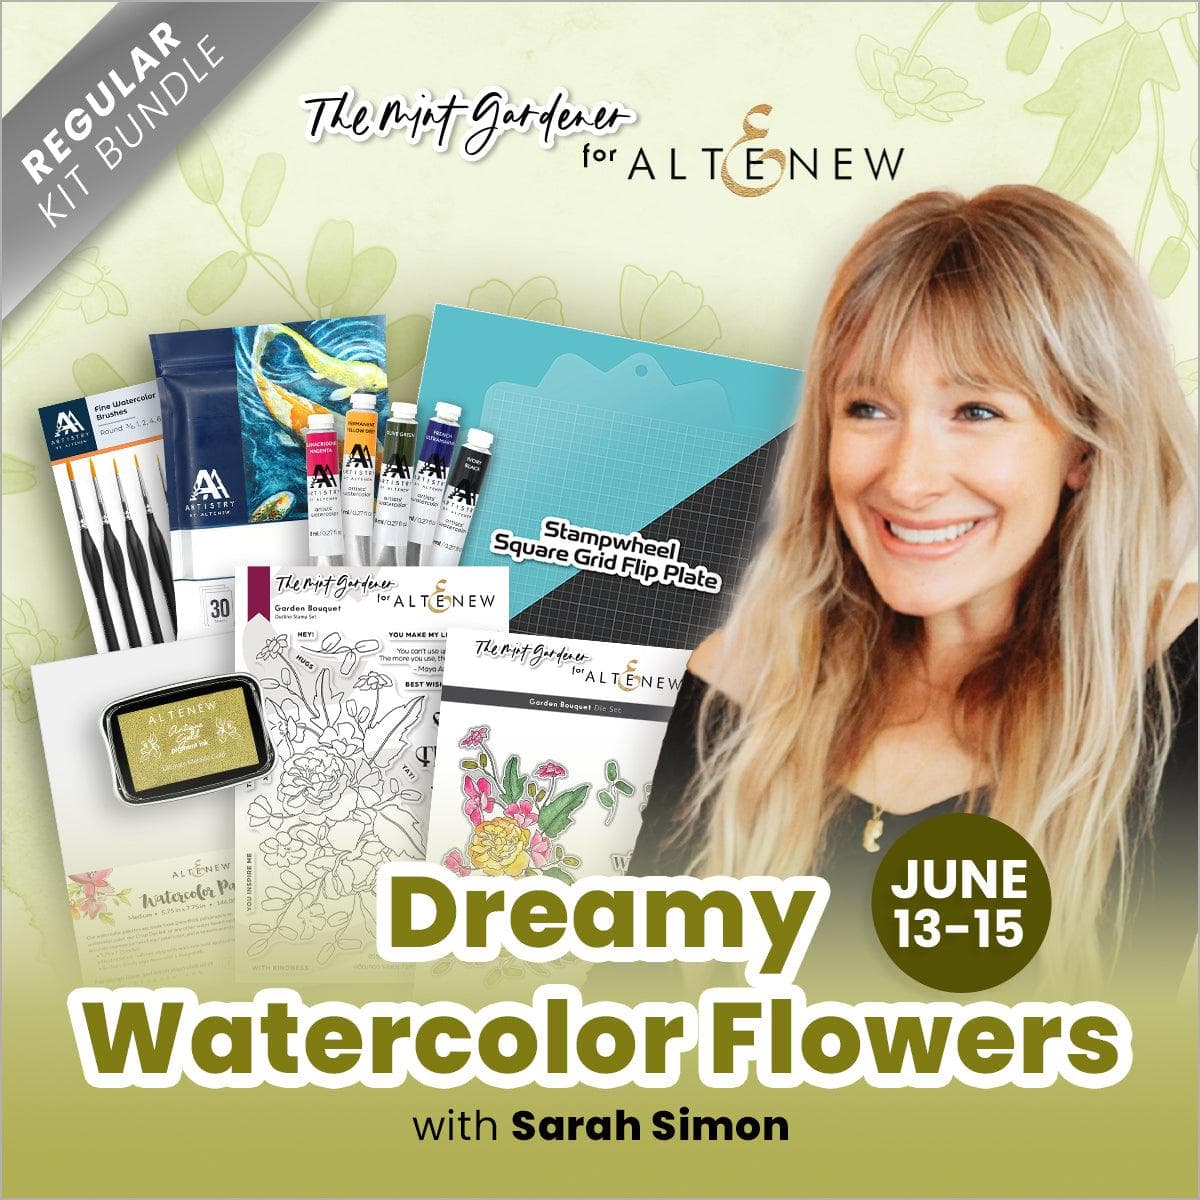 Dreamy Watercolor Flowers with Sarah Simon